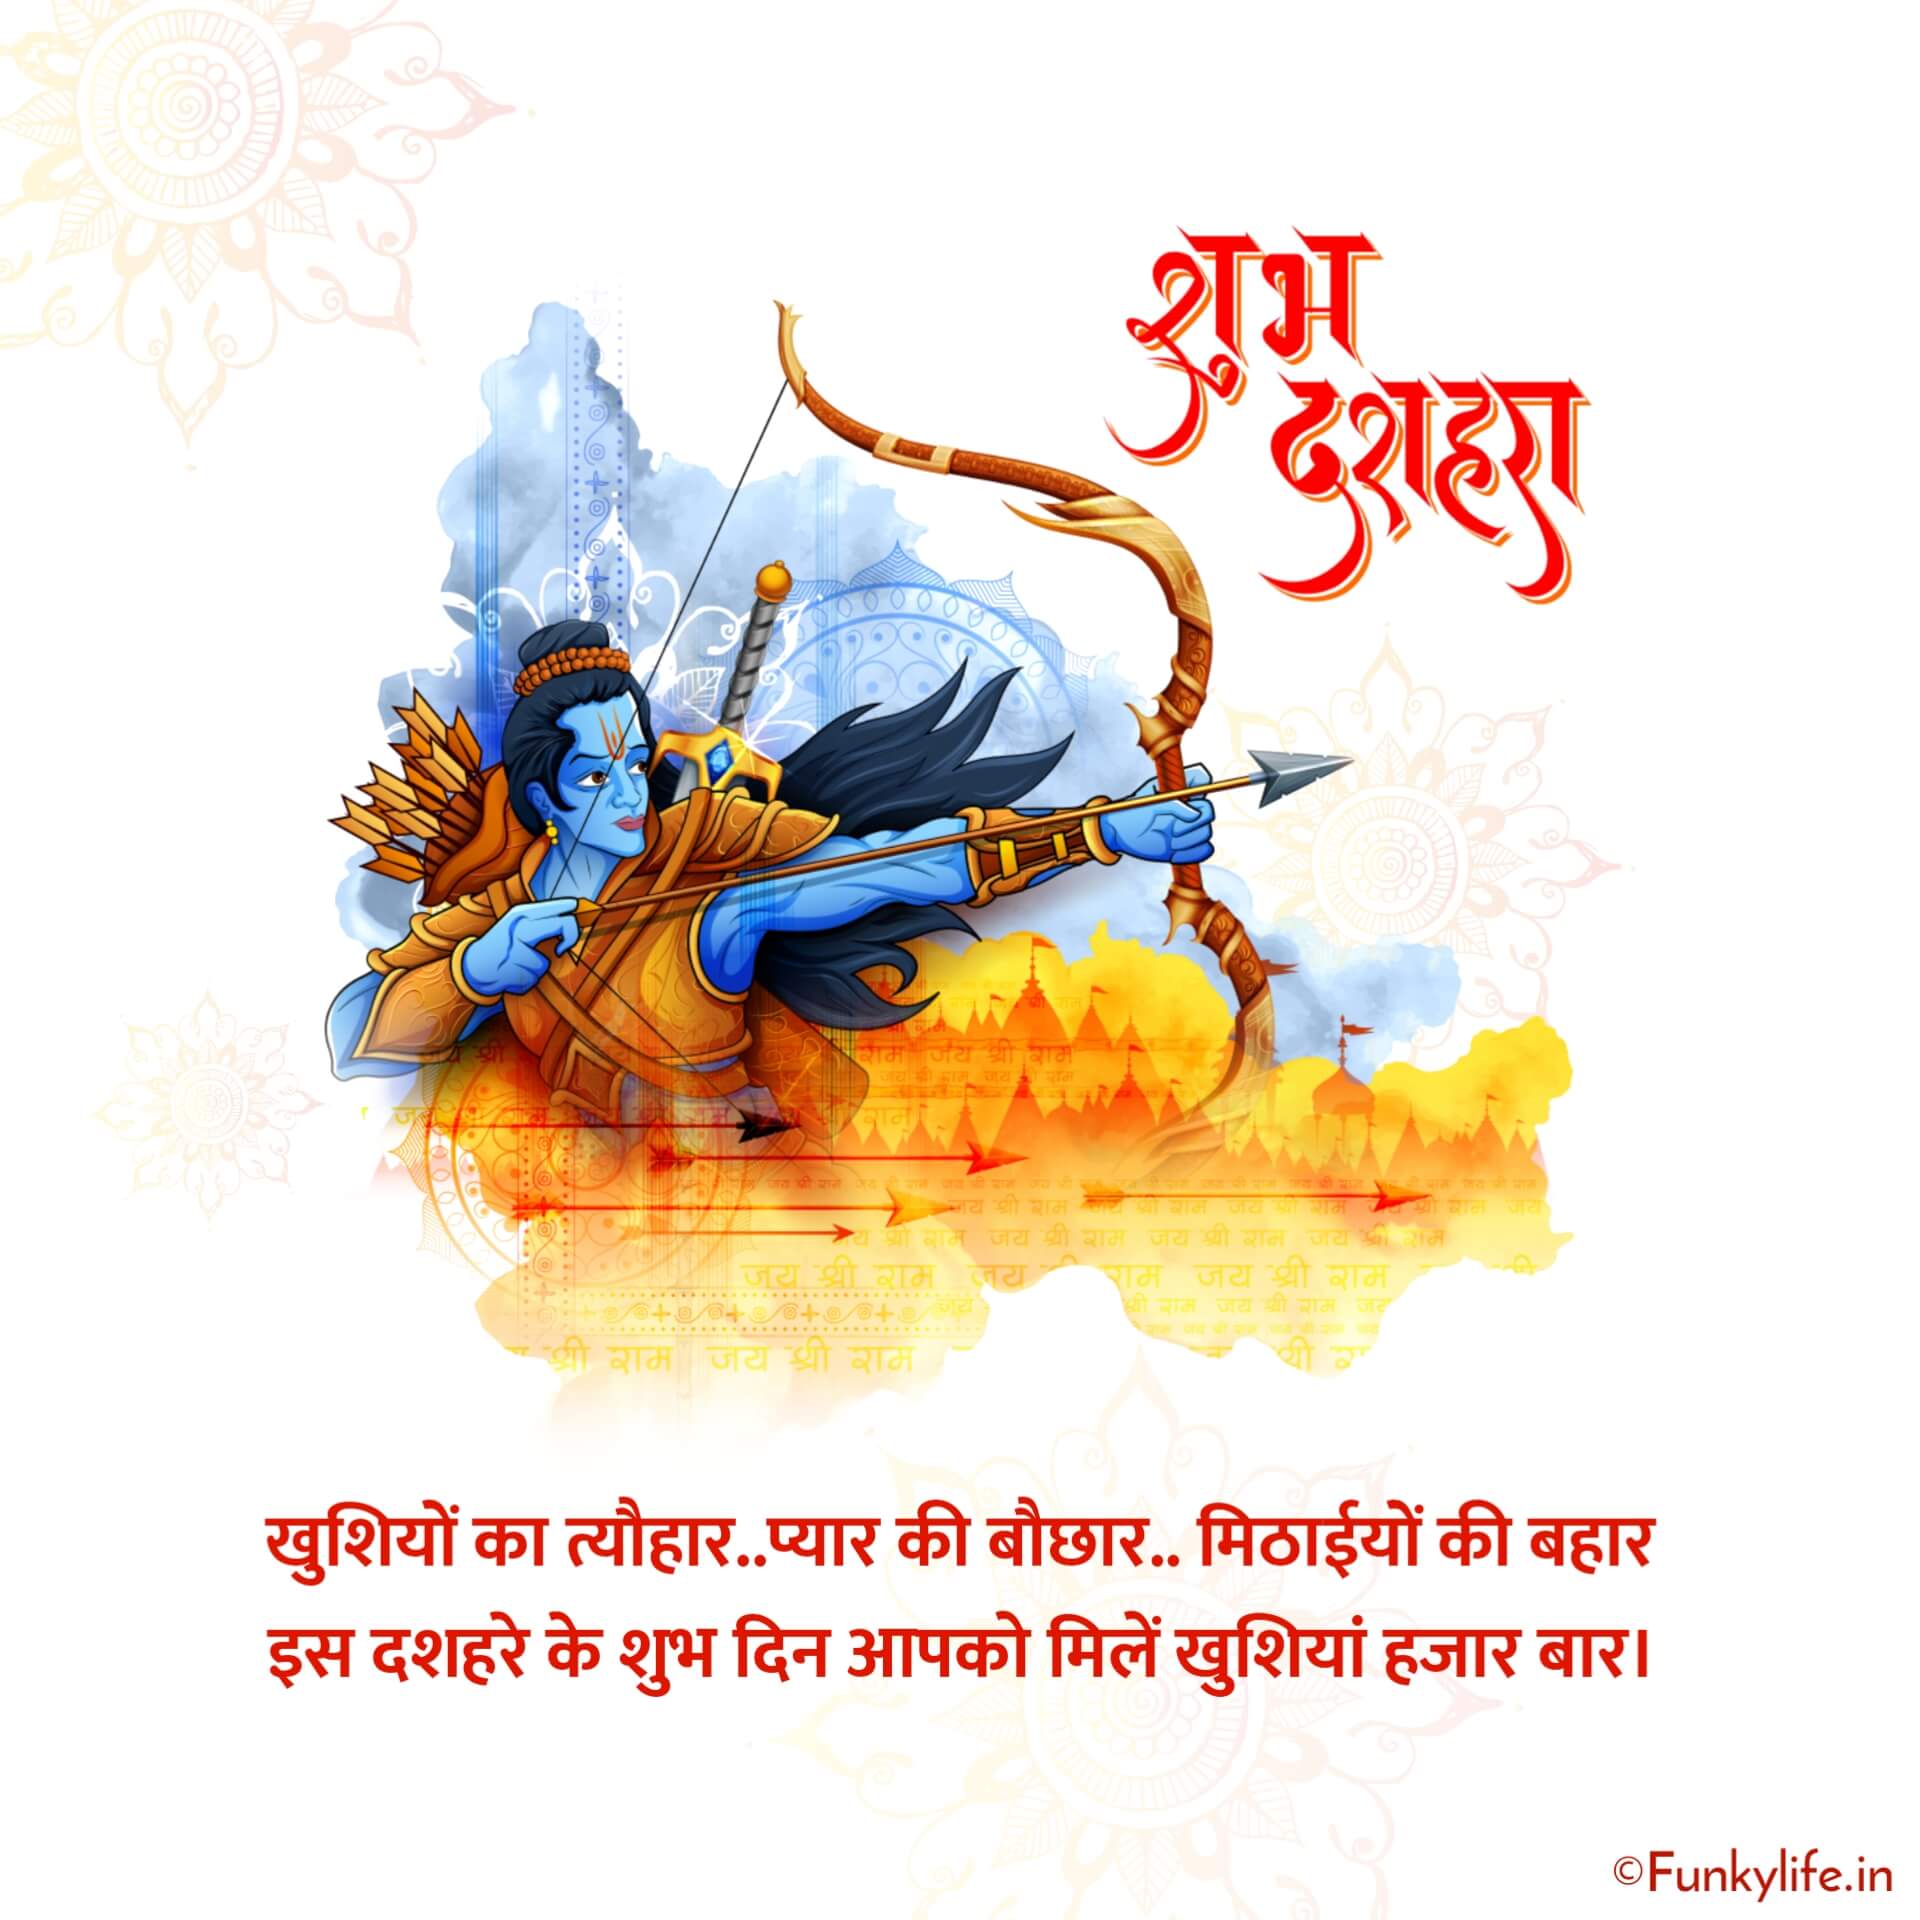 Hindi Dussehra Pictures